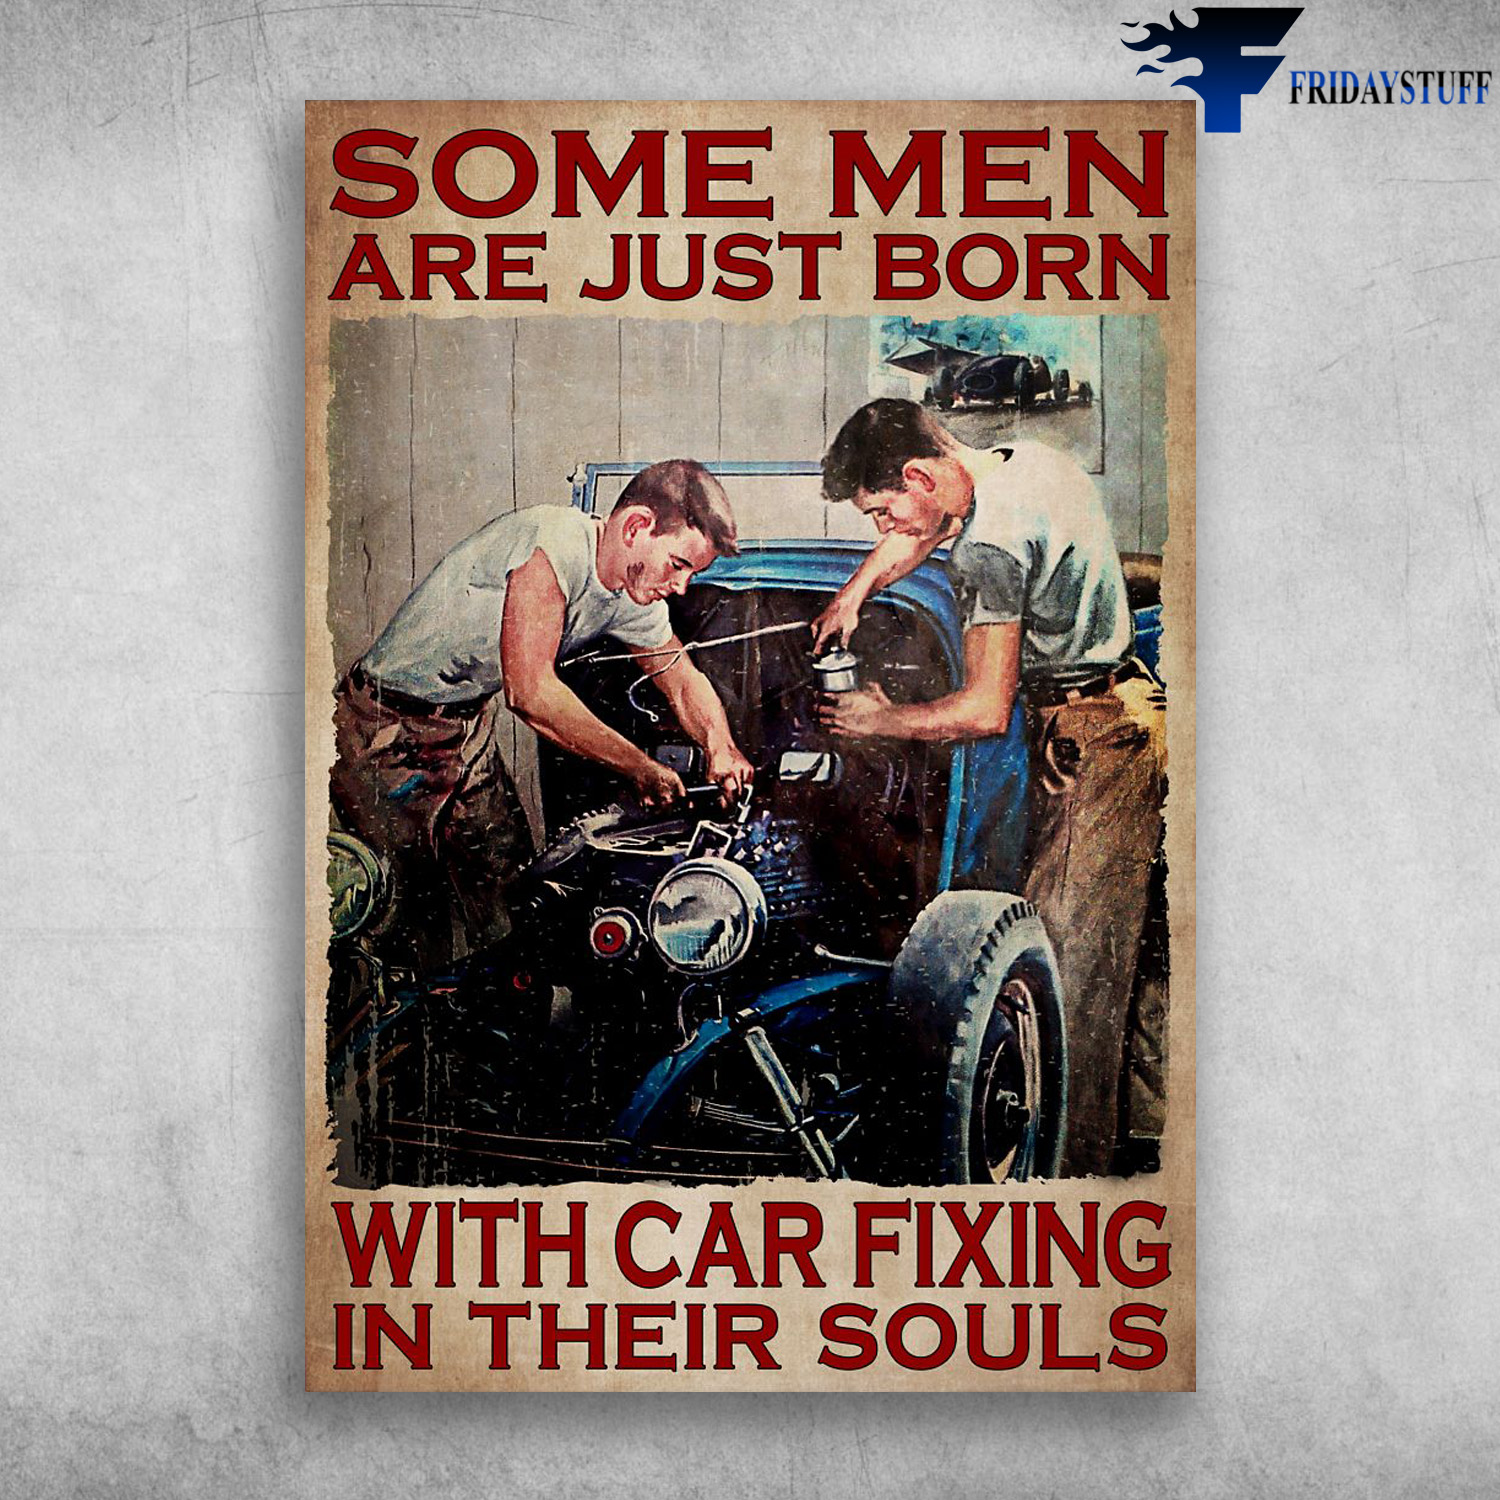 Two Man Fixing Car - Some Men Are Just Born, With Car Fixing In Their Souls